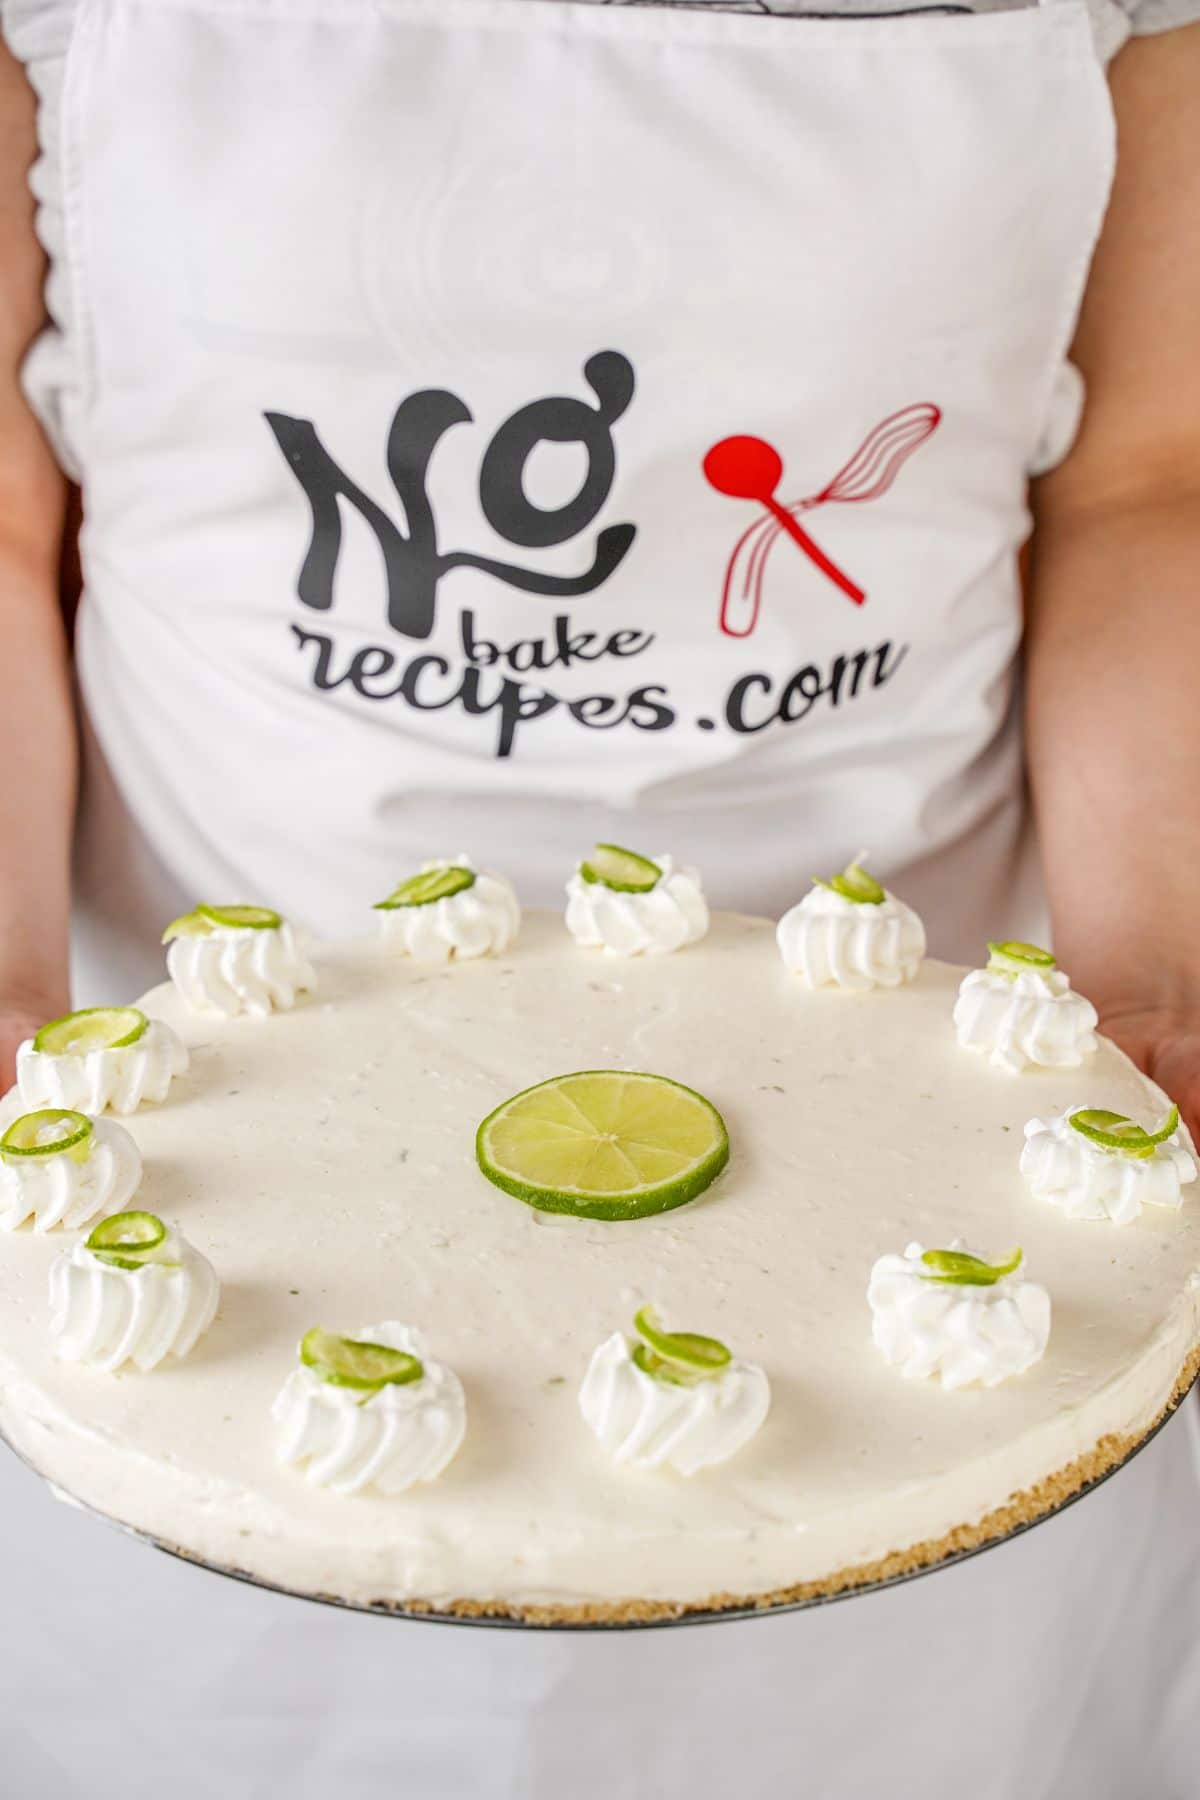 woman in apron that says no bake recipes holding whole key lime tart